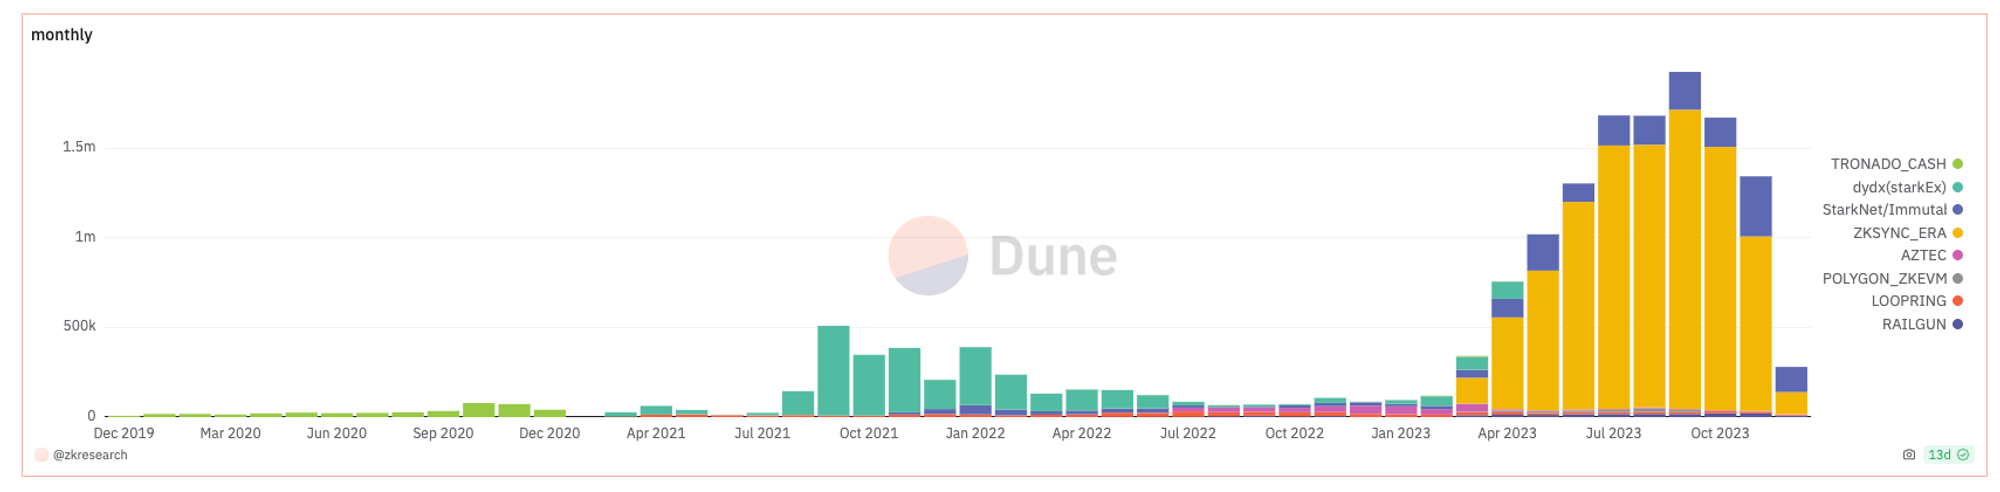 https://dune.com/nebra/zkp-verify-spending A strong increase in ZK verification cost over last year.